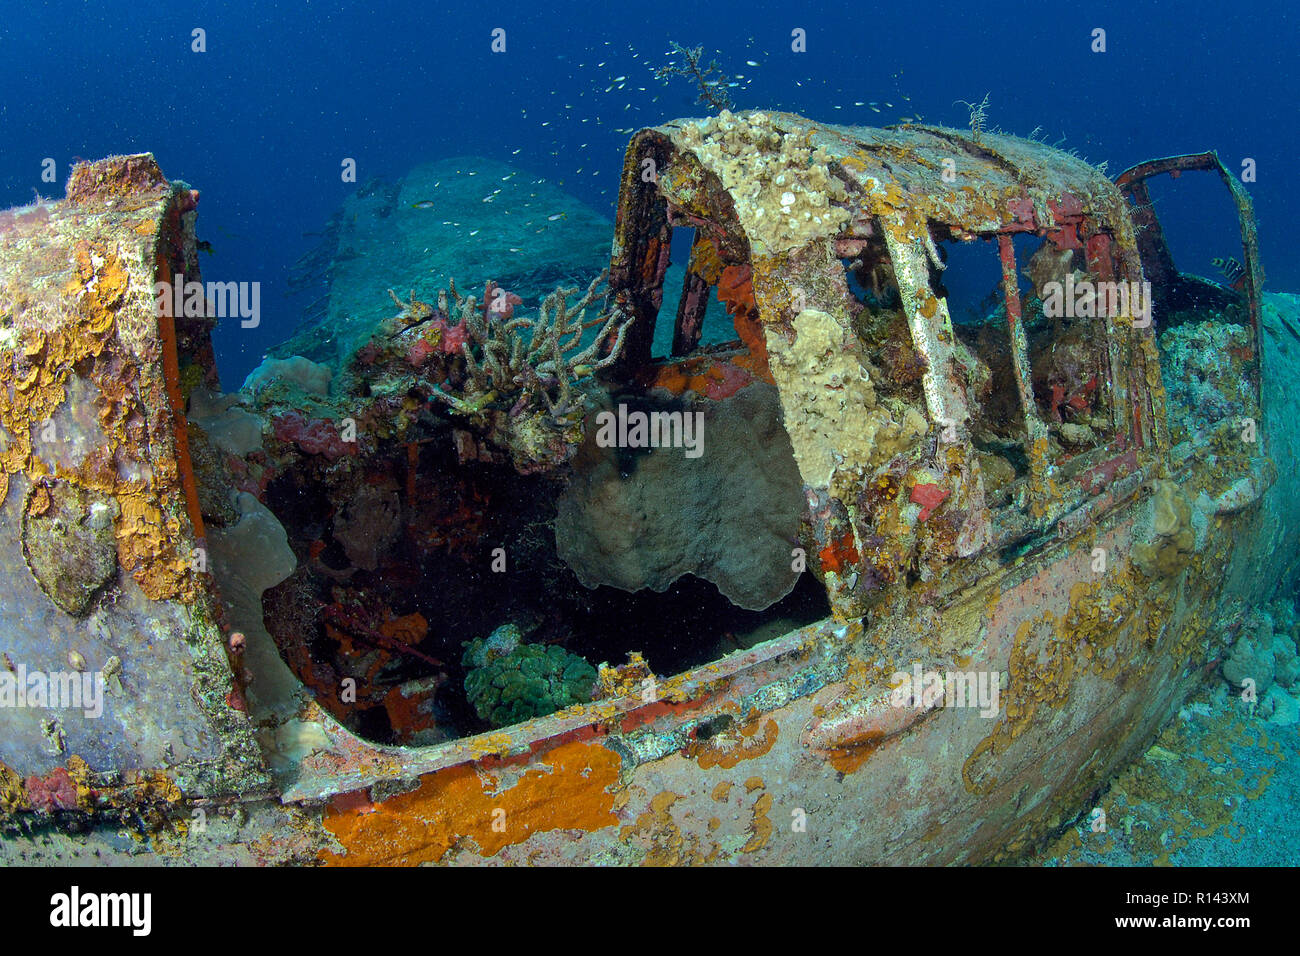 Overgrown cockpit of a american Zerofighter, crashed at WW II, Palau, Micronesia Stock Photo